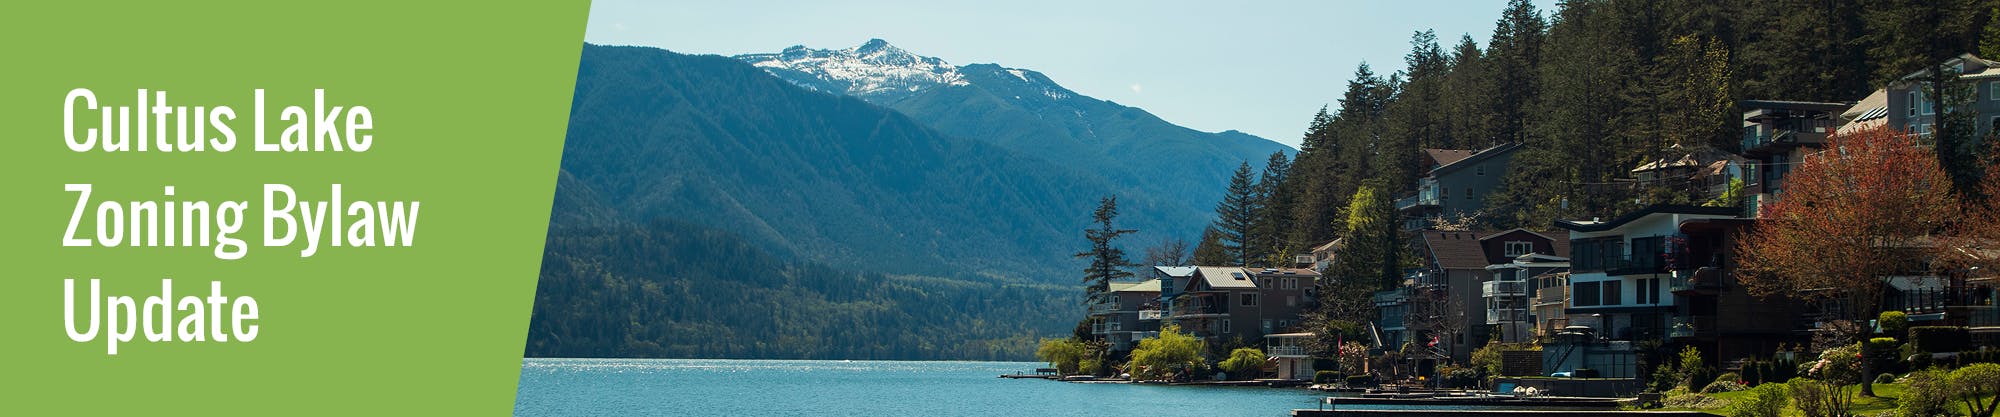 Image of Cultus Lake showing the lake, mountains and homes along the edge of the lake